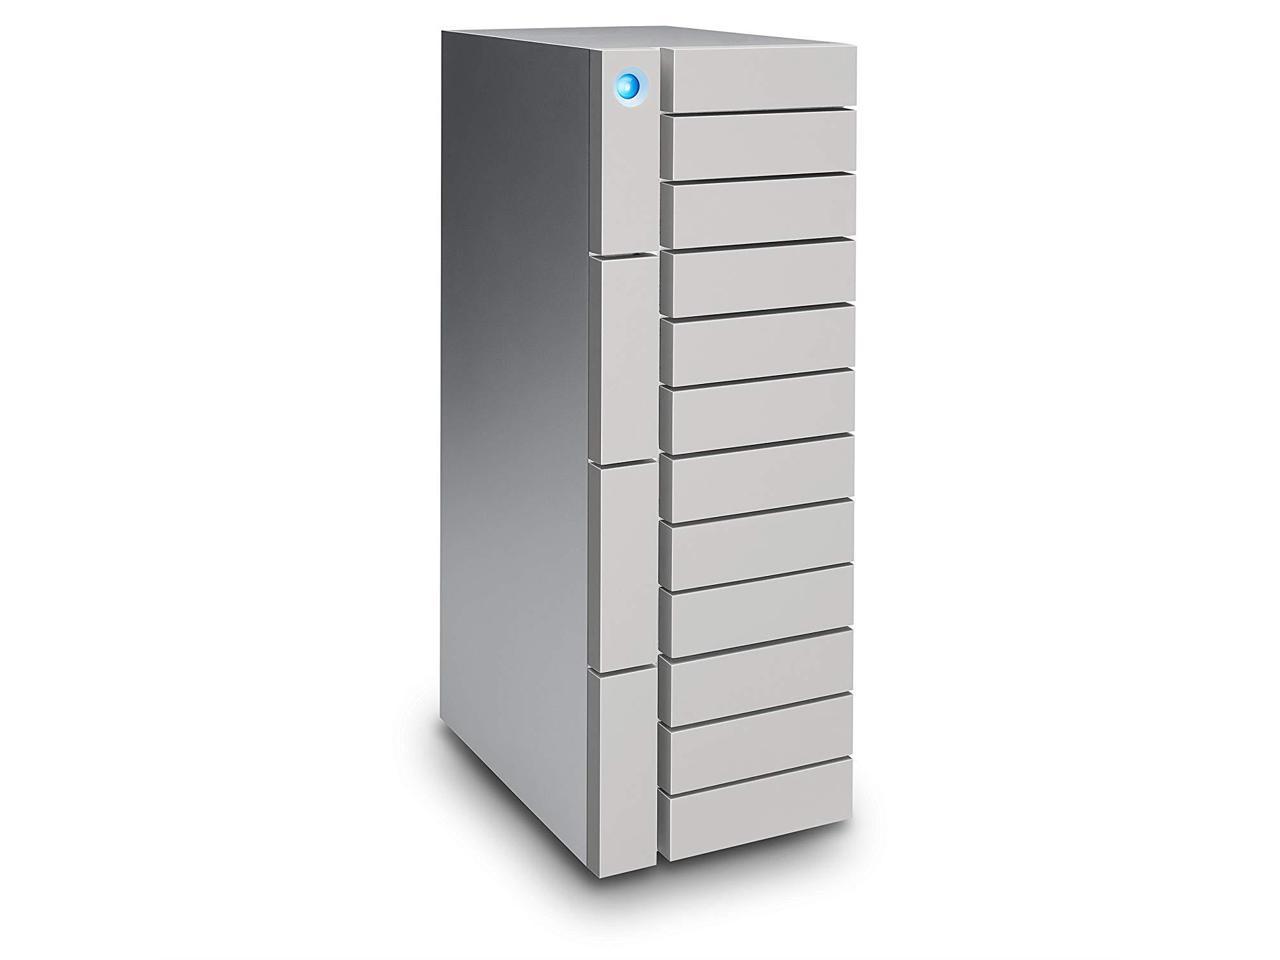 LaCie 12big STF DAS Array 12 x HDD Supported 12 x HDD Installed 48TB Installed HDD Capacity Model STFJ48000400